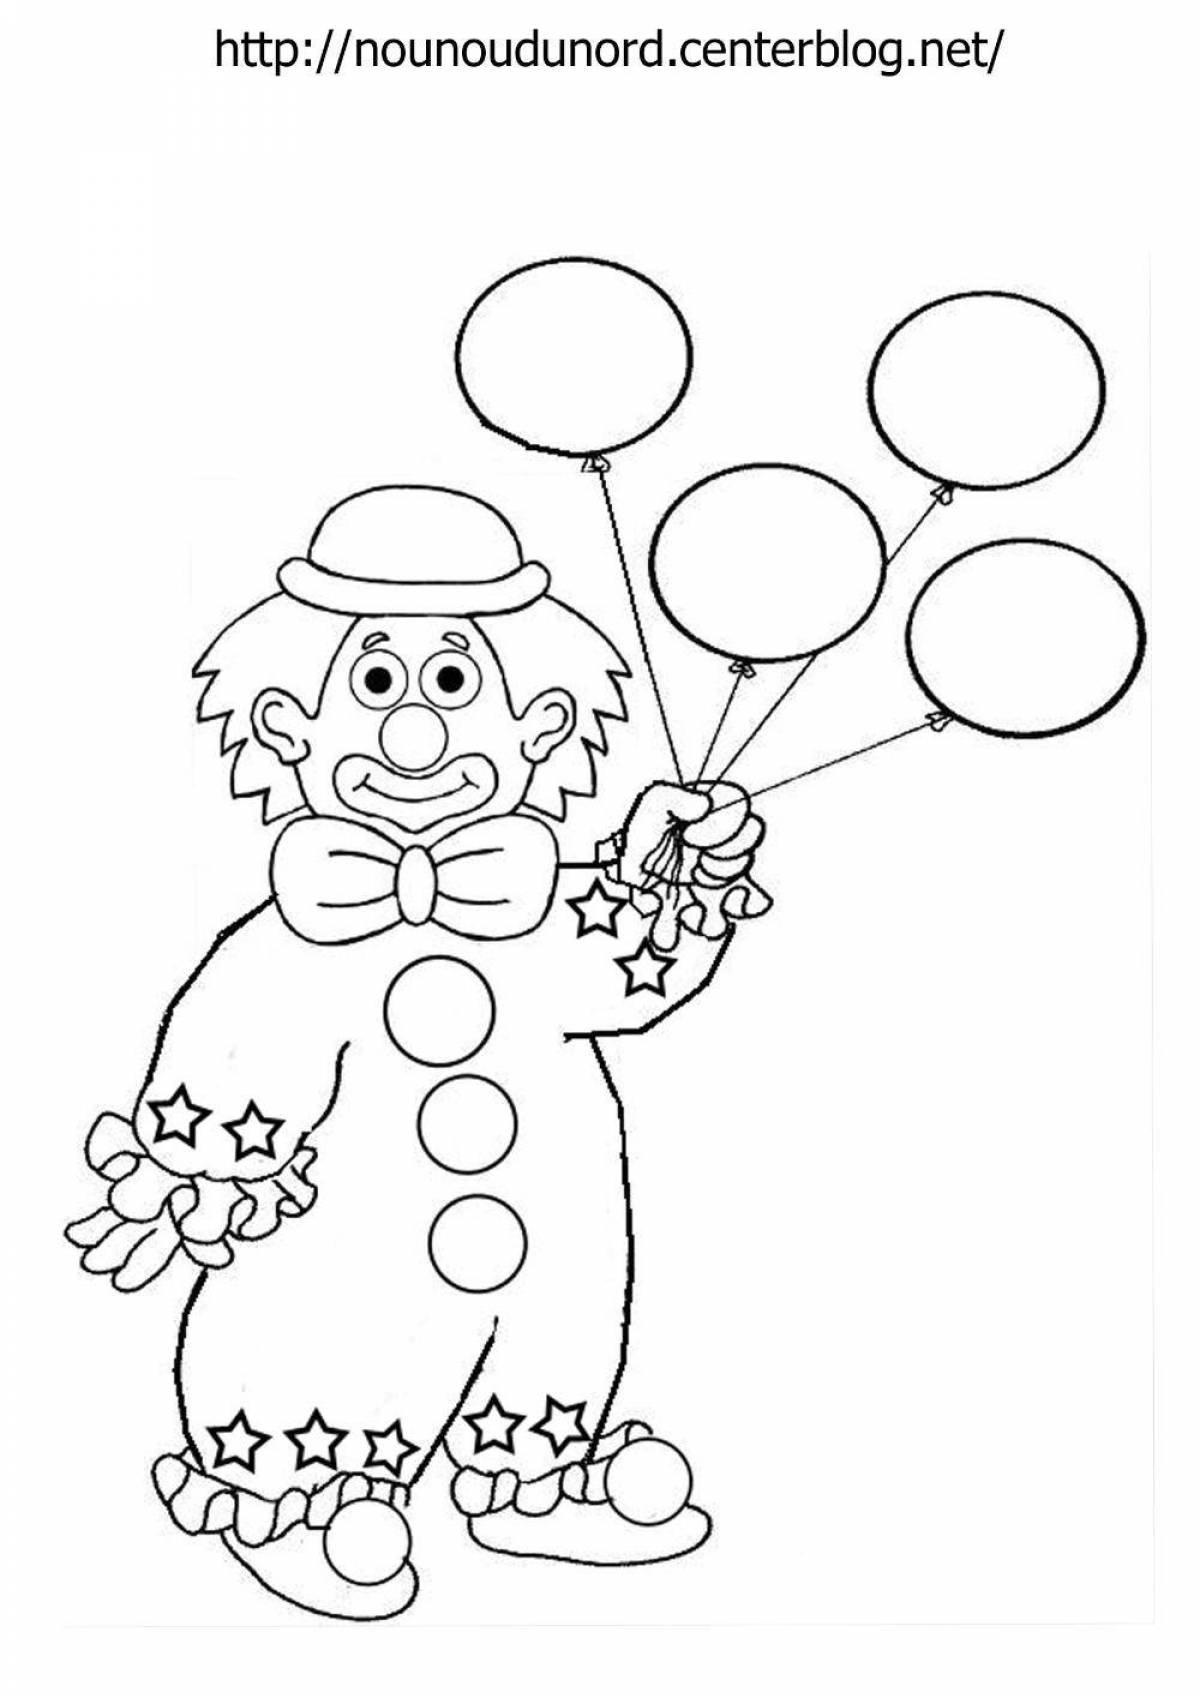 Coloring book shining clown for kids